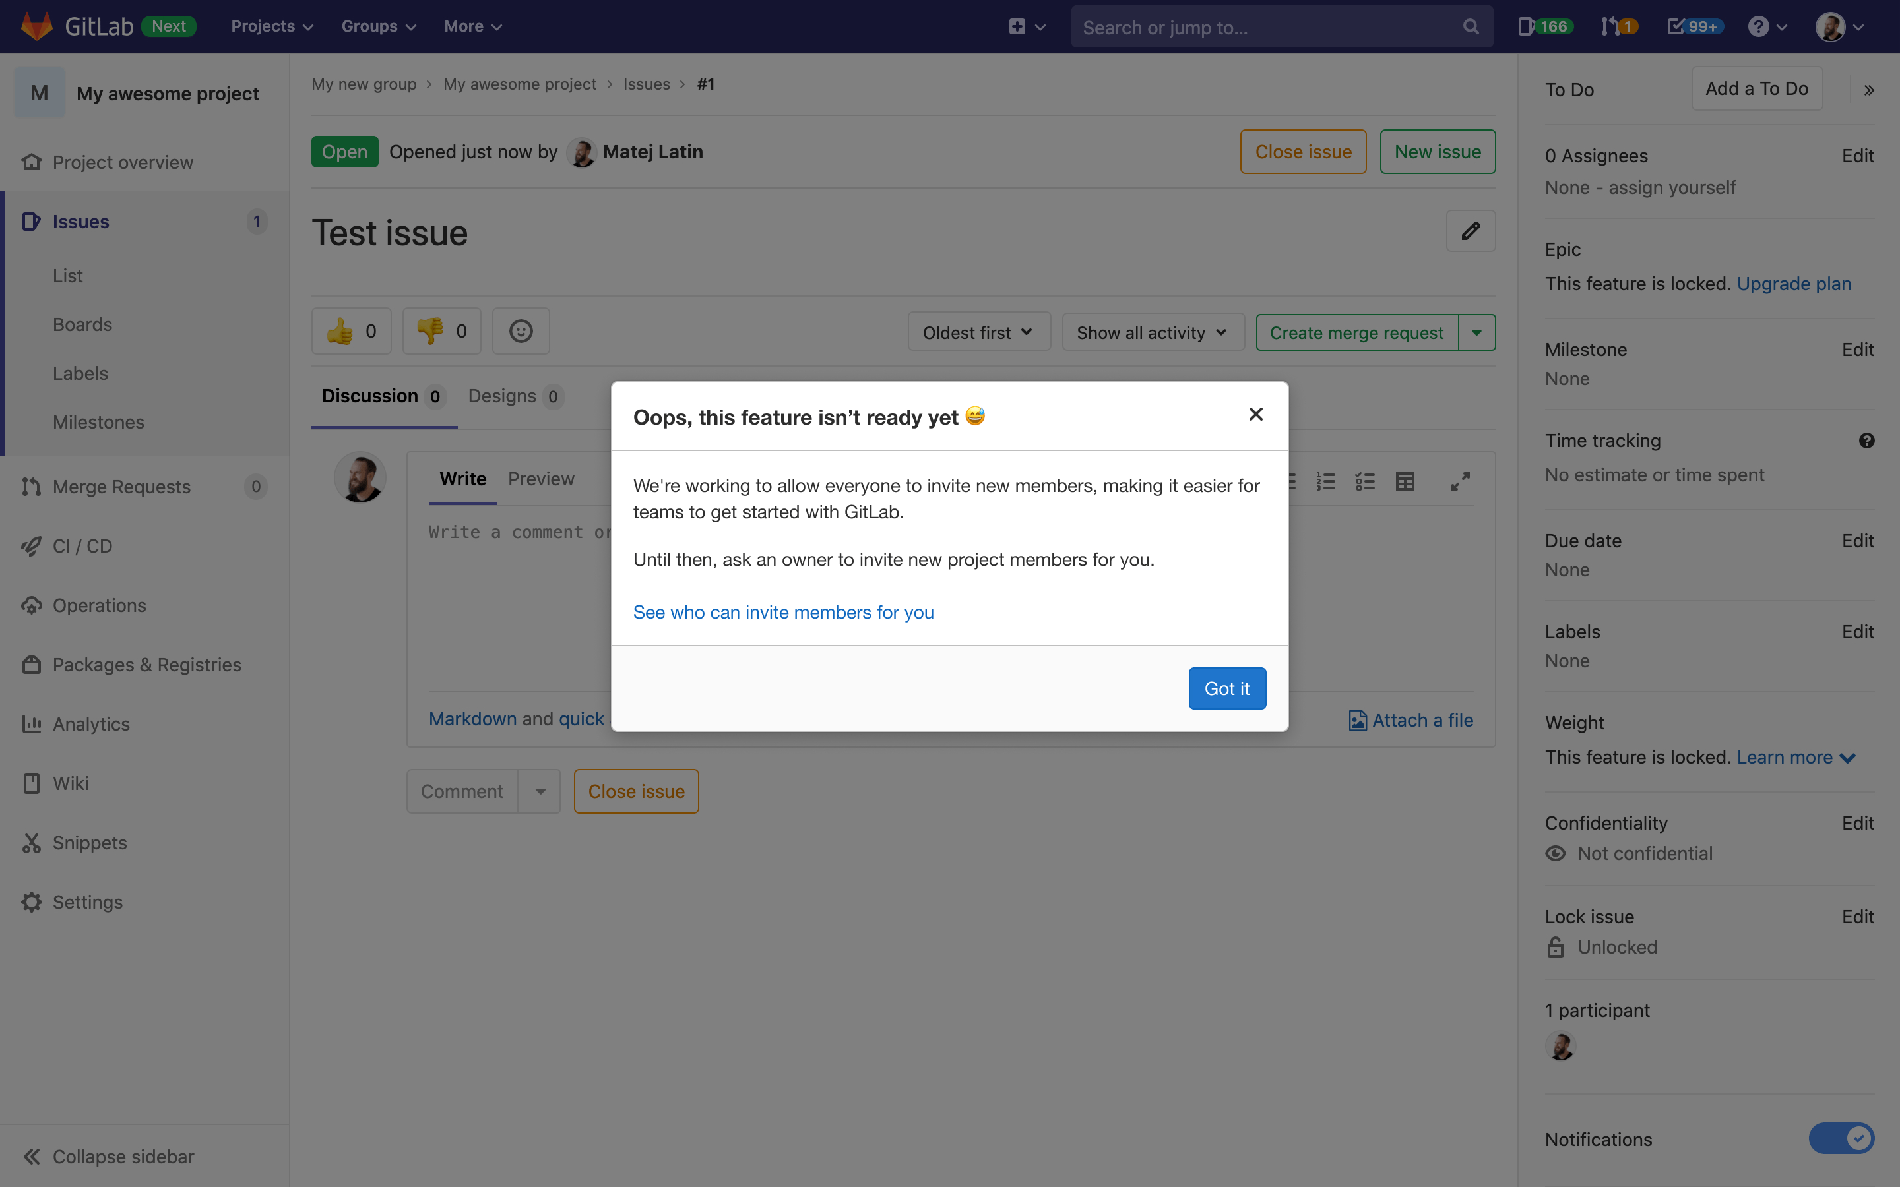 Modal showing "invite members" feature isn't ready yet